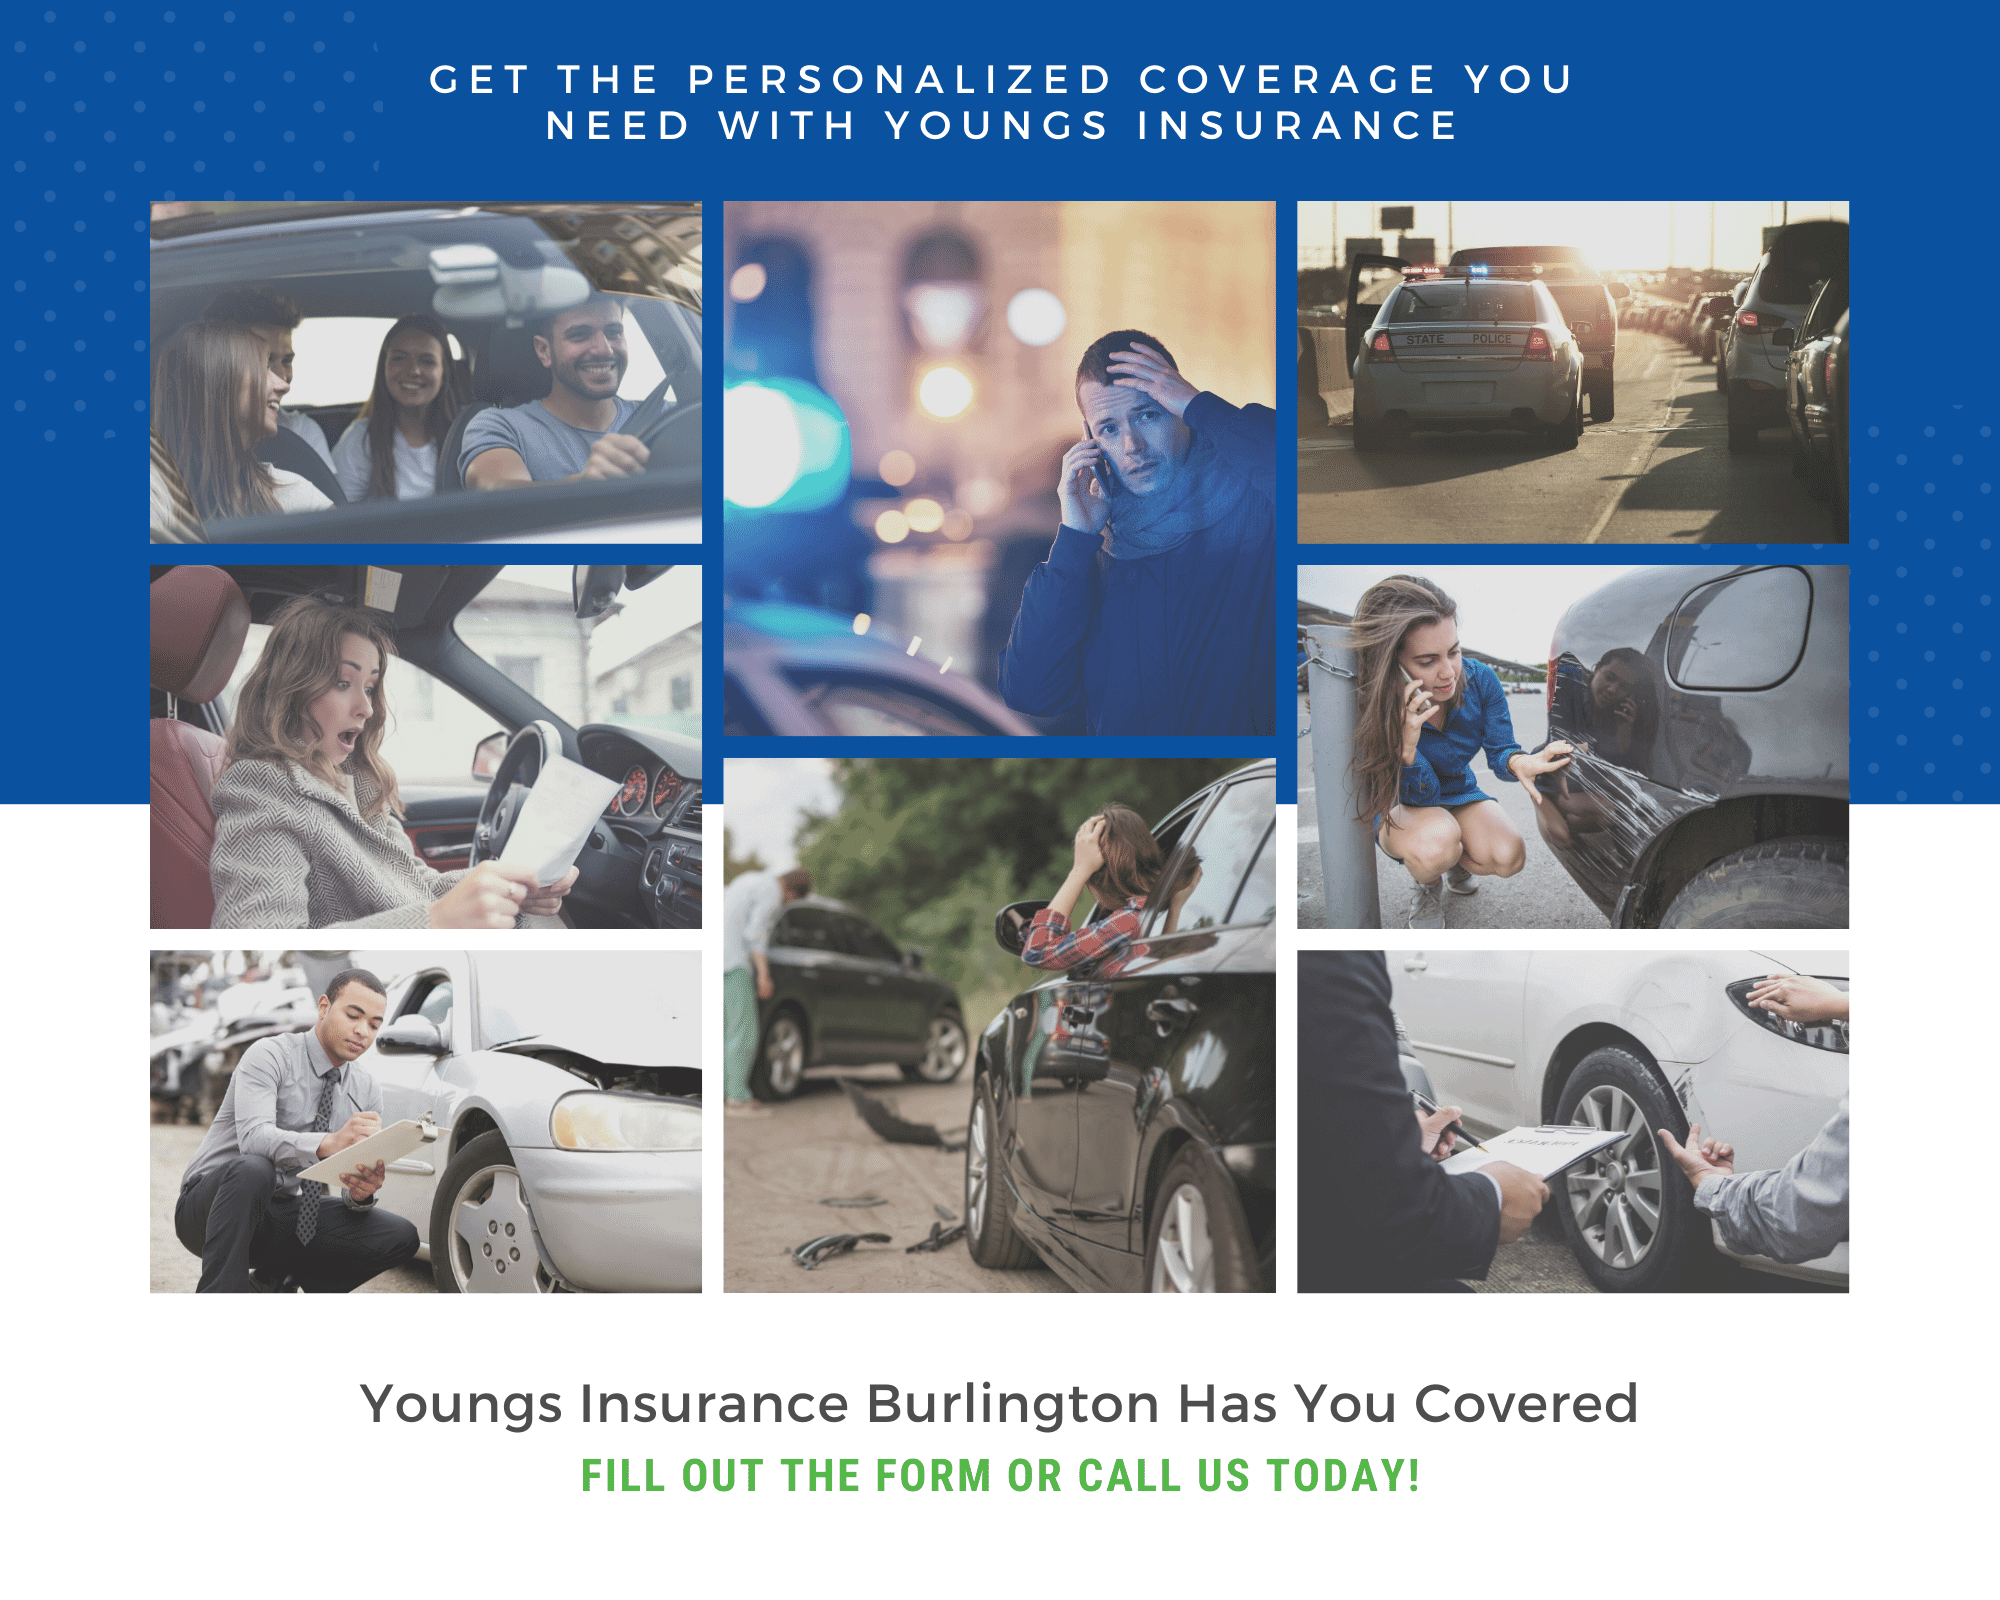 Get The Personalized Coverage You Need with Youngs Insurance